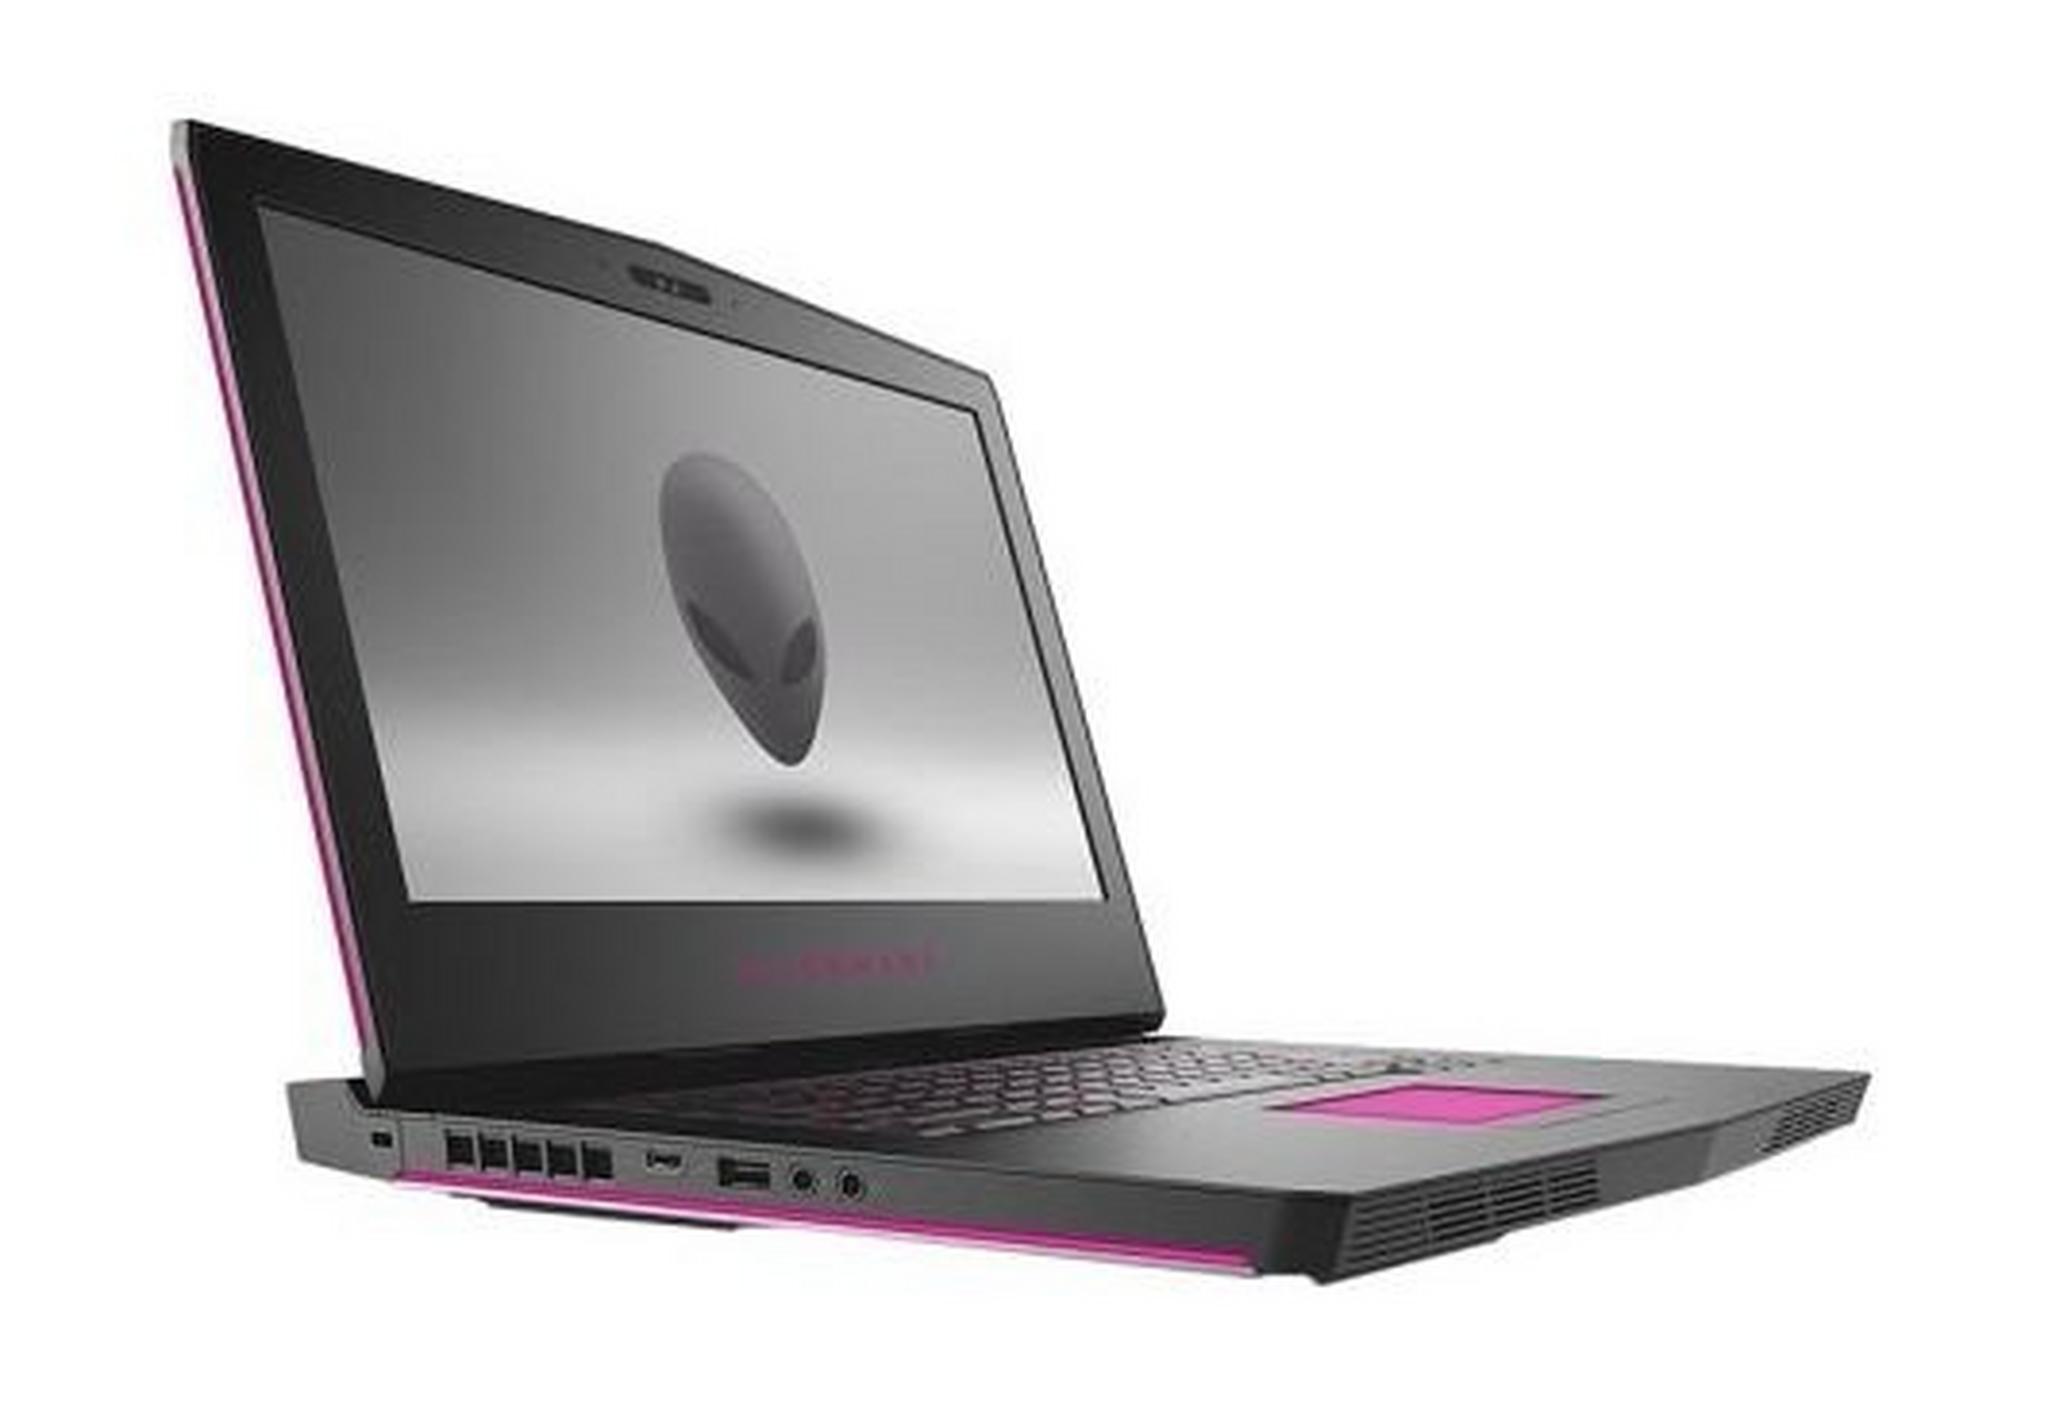 Dell Alienware 13 Gaming Laptop, Core i7 16GB RAM 360GB SSD, 6GB Nvidia, 13.3-inch Display (1046) –Silver